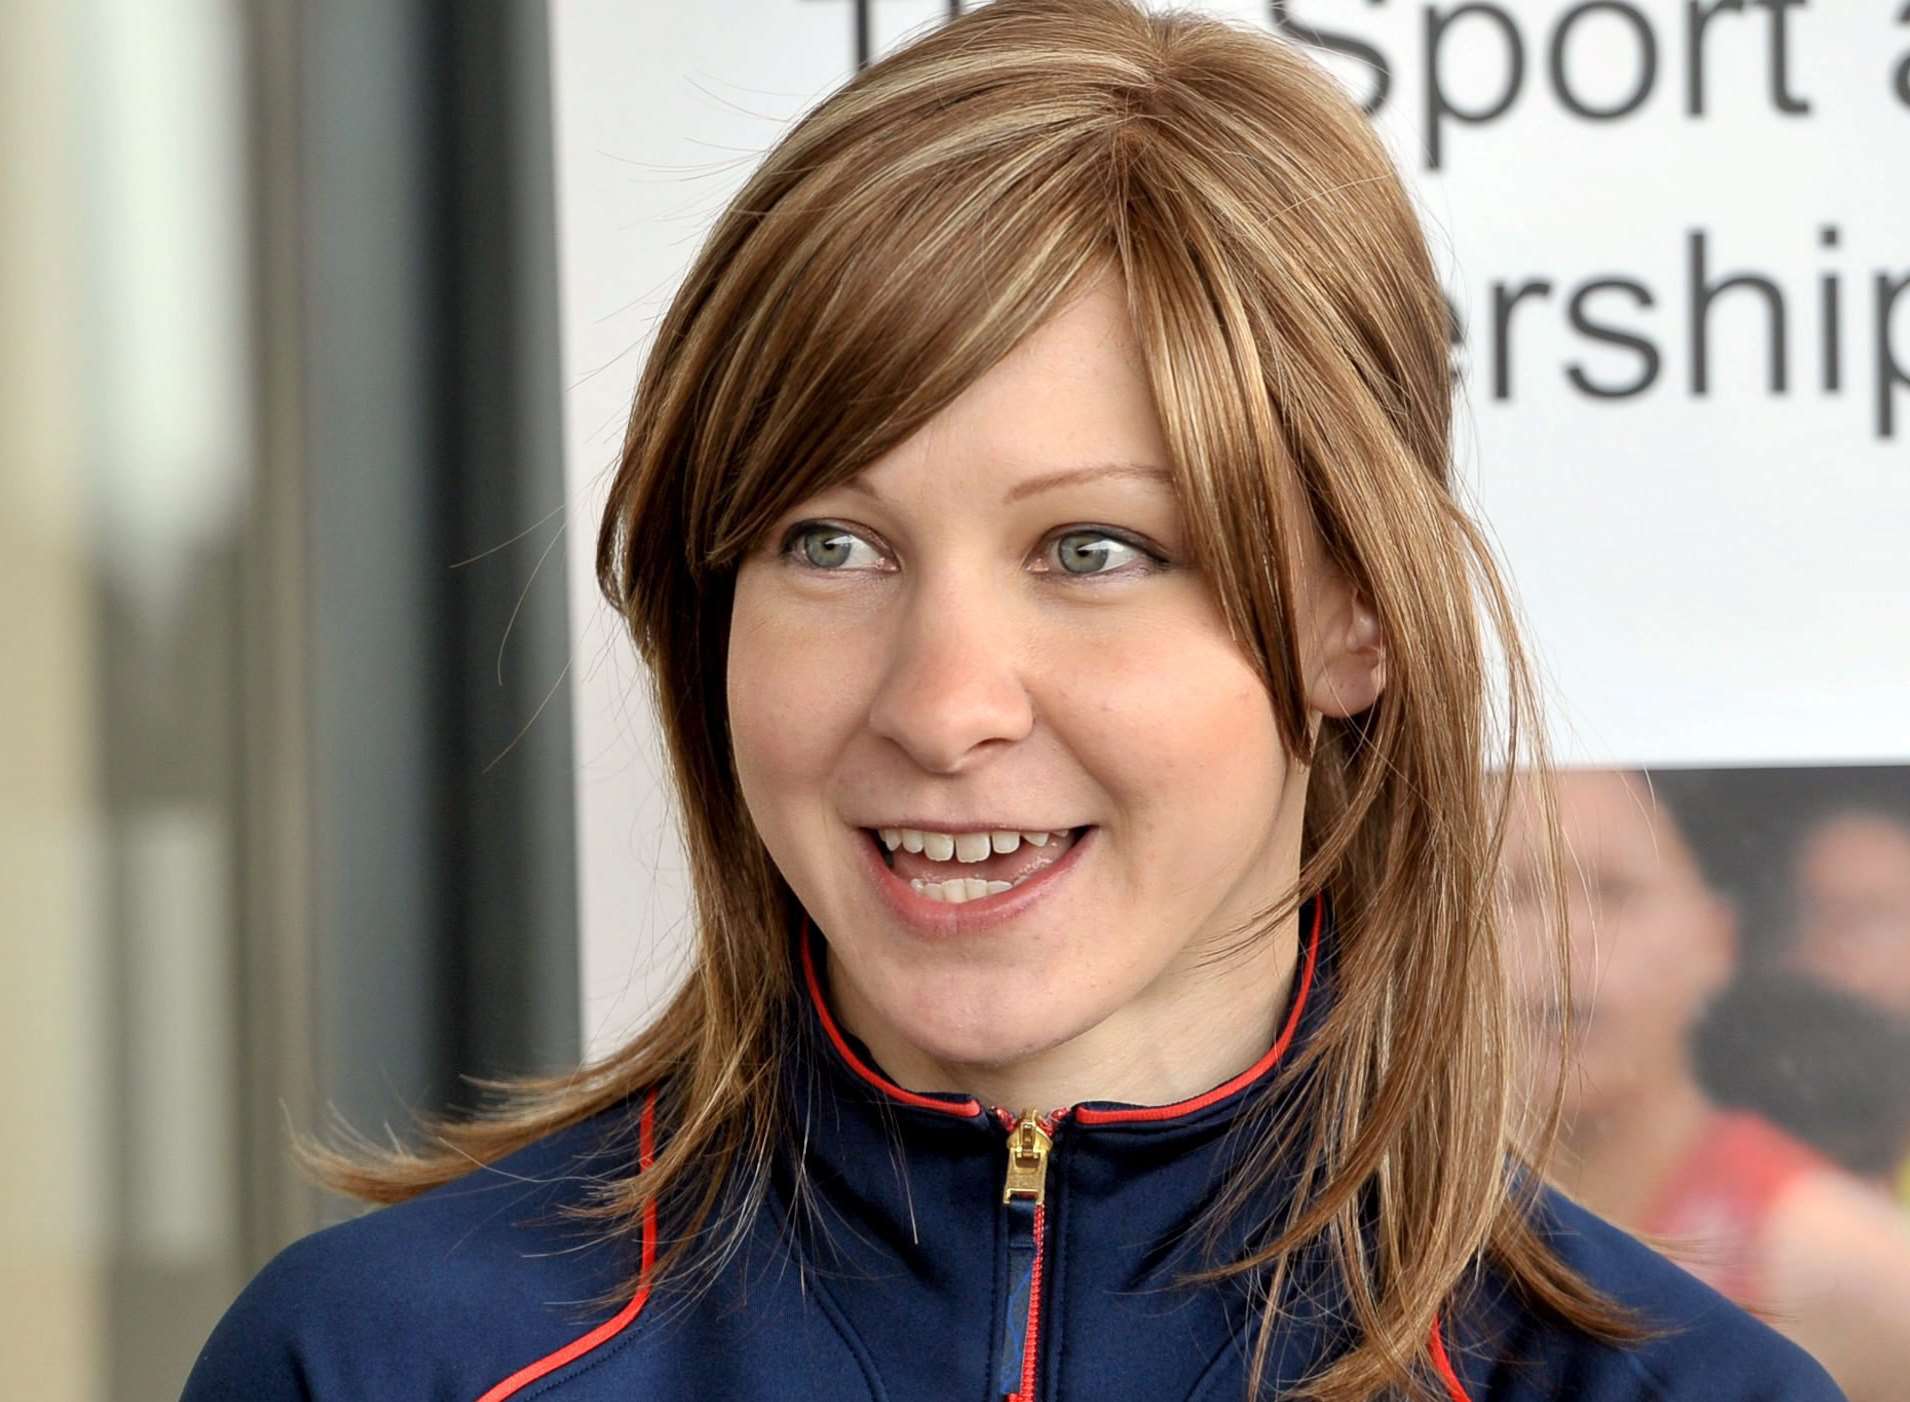 Joanna Rowsell, Olympic Gold medal-winning cyclist